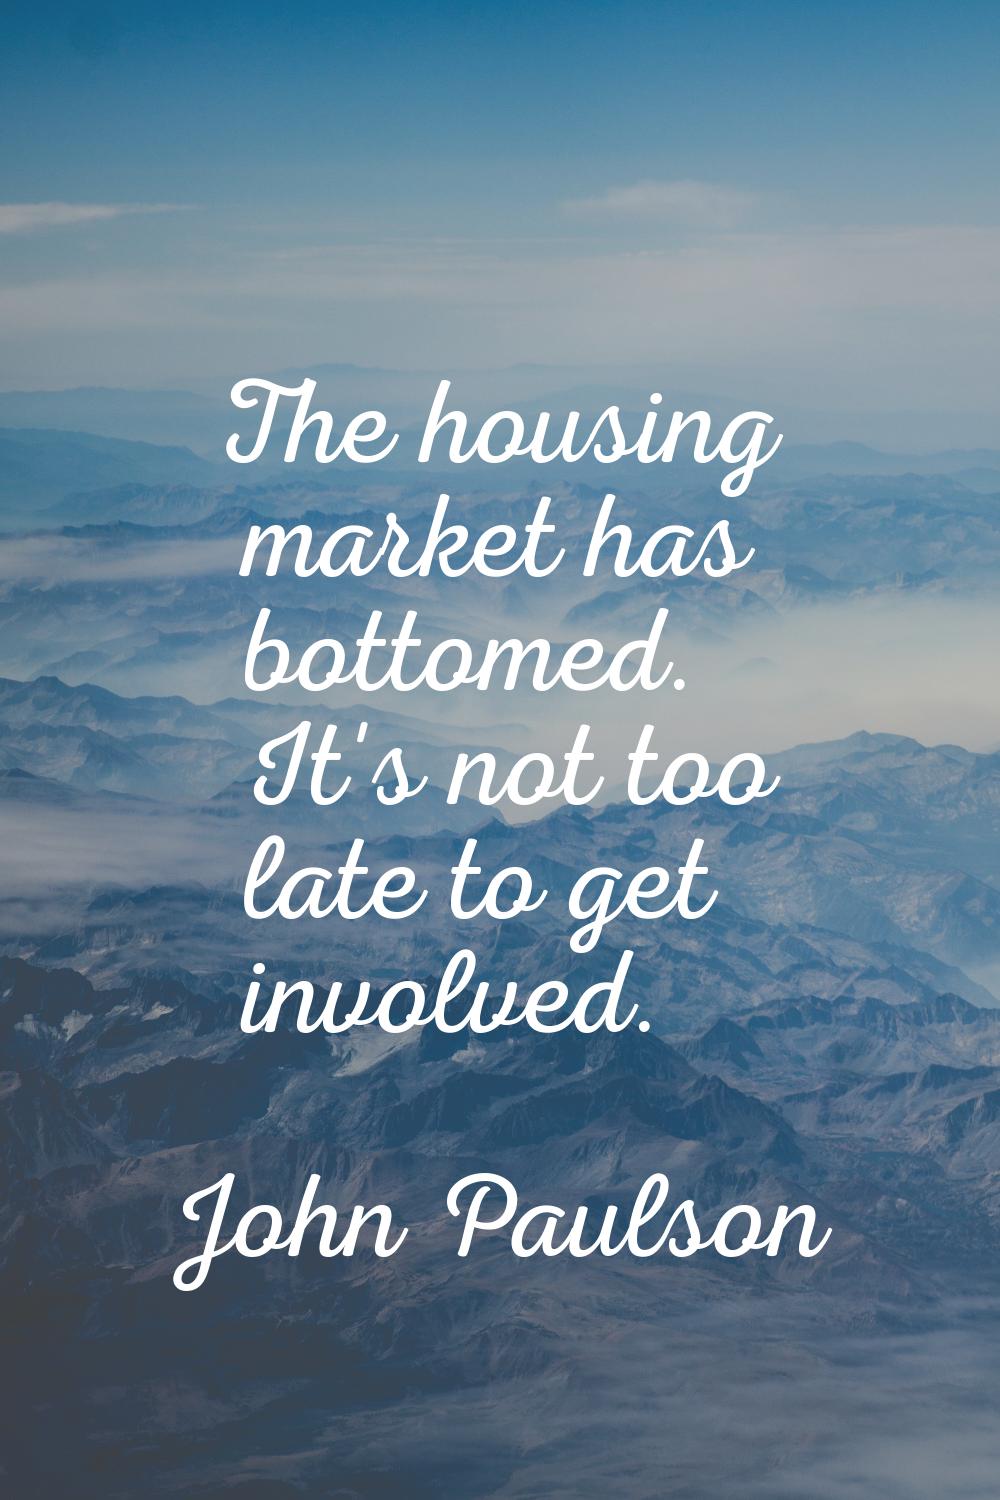 The housing market has bottomed. It's not too late to get involved.